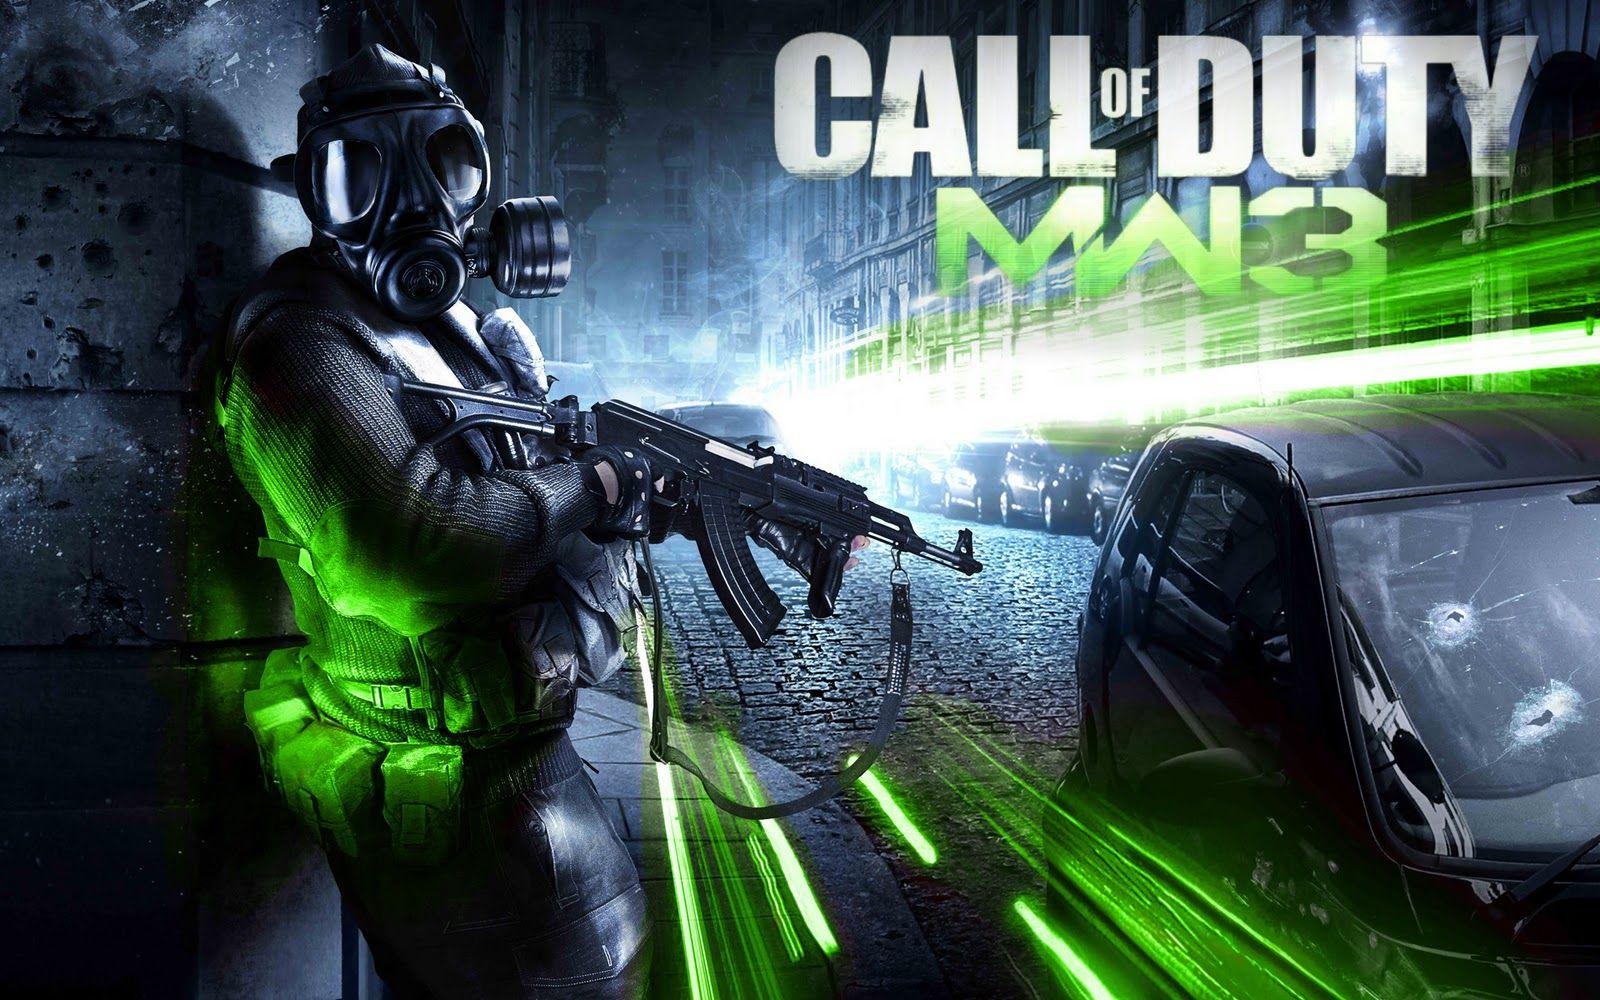 Cool Gamer Pics. MW3 Videos and Picture. Cool Things. Picture